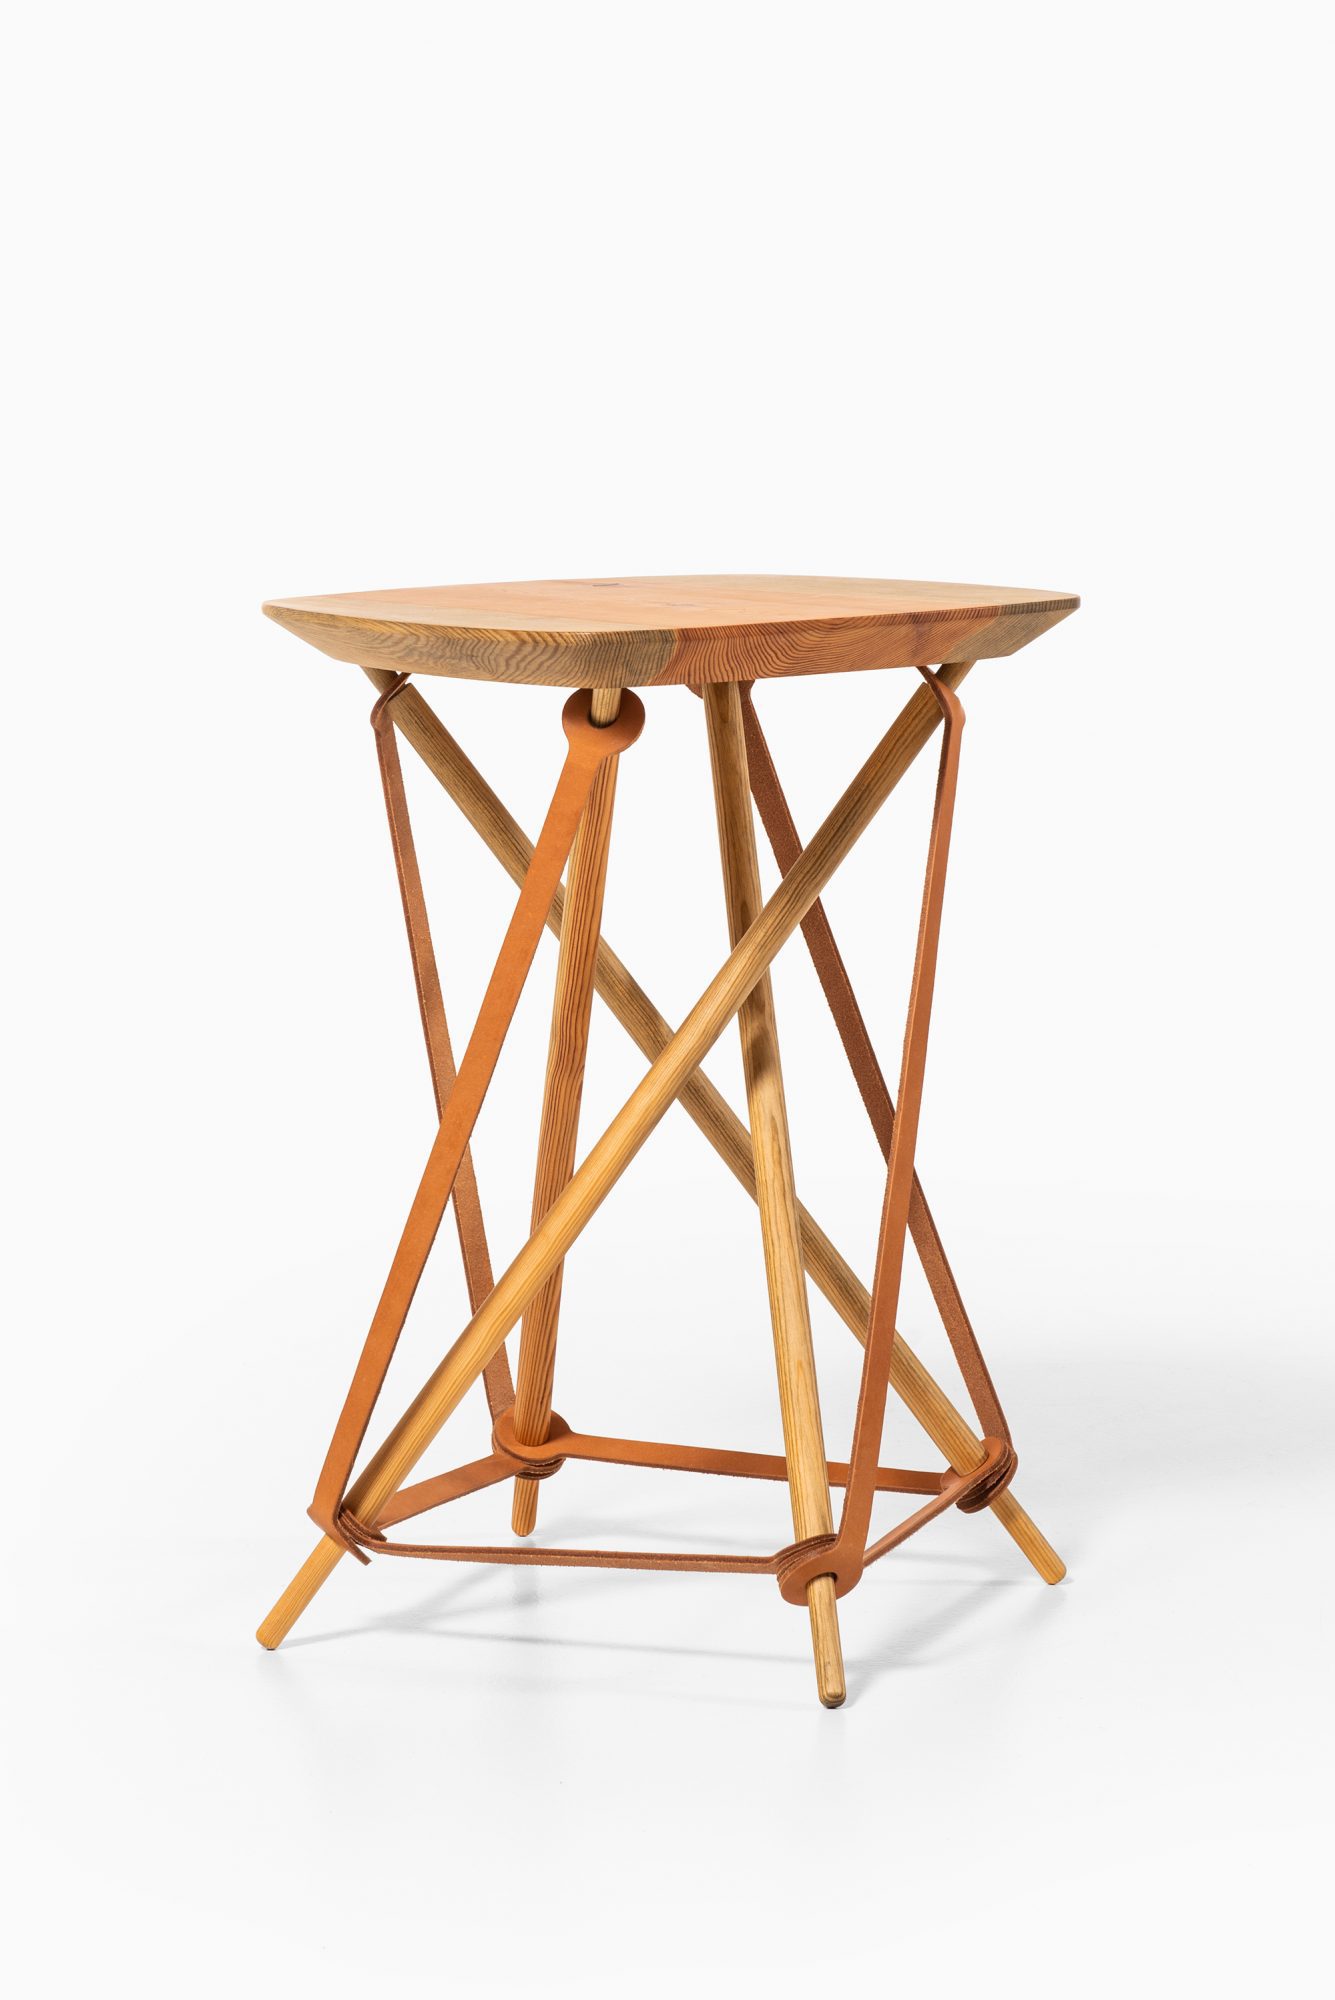 Lith Lith Lundin stool / side table in pine and leather at Studio Schalling